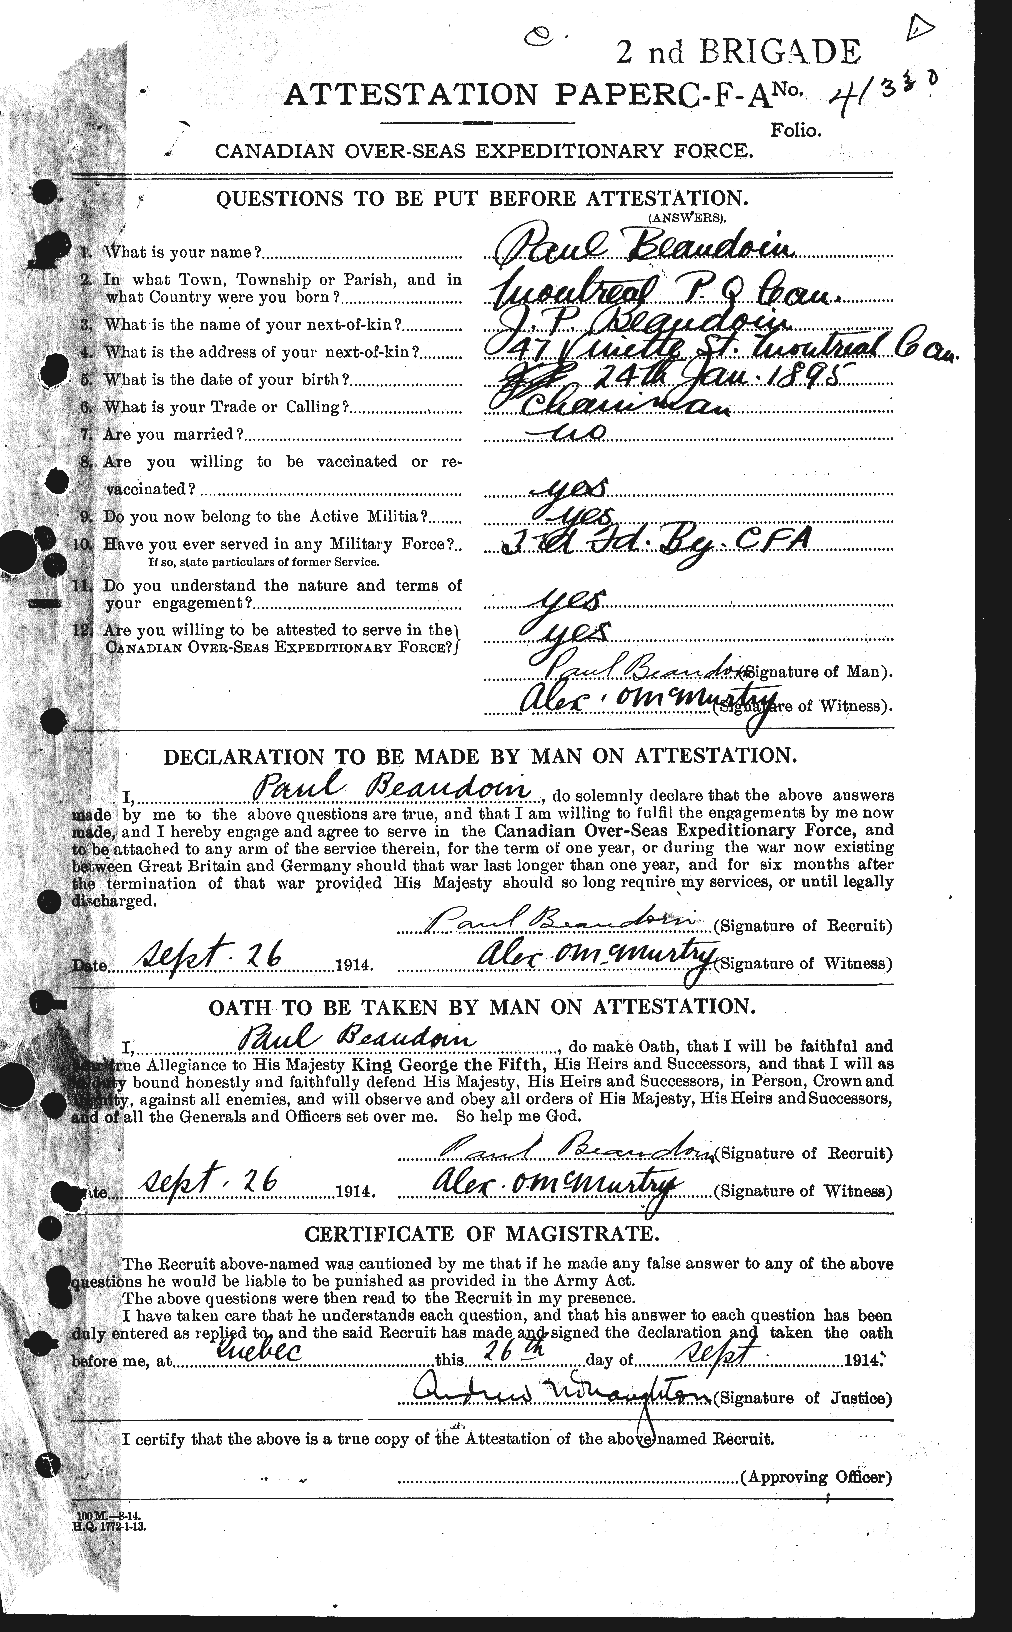 Personnel Records of the First World War - CEF 231284a